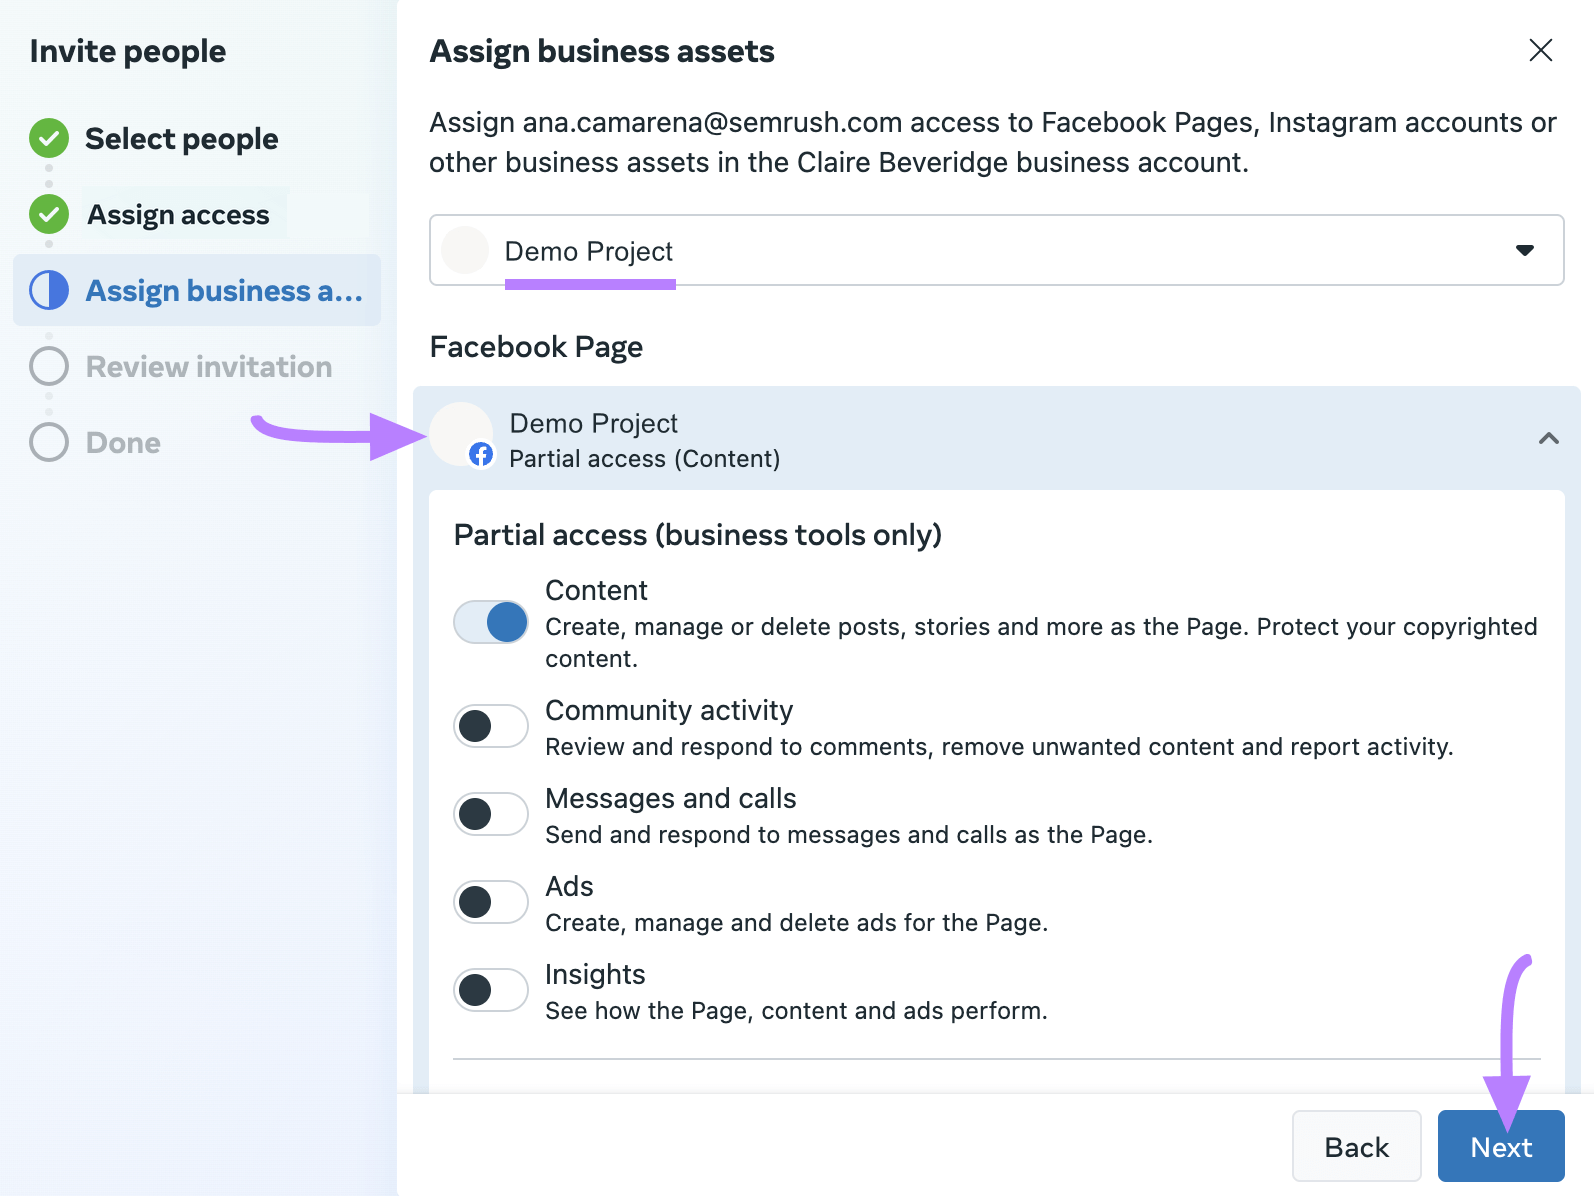 "Assign business assets" window in Facebook Business Manager settings